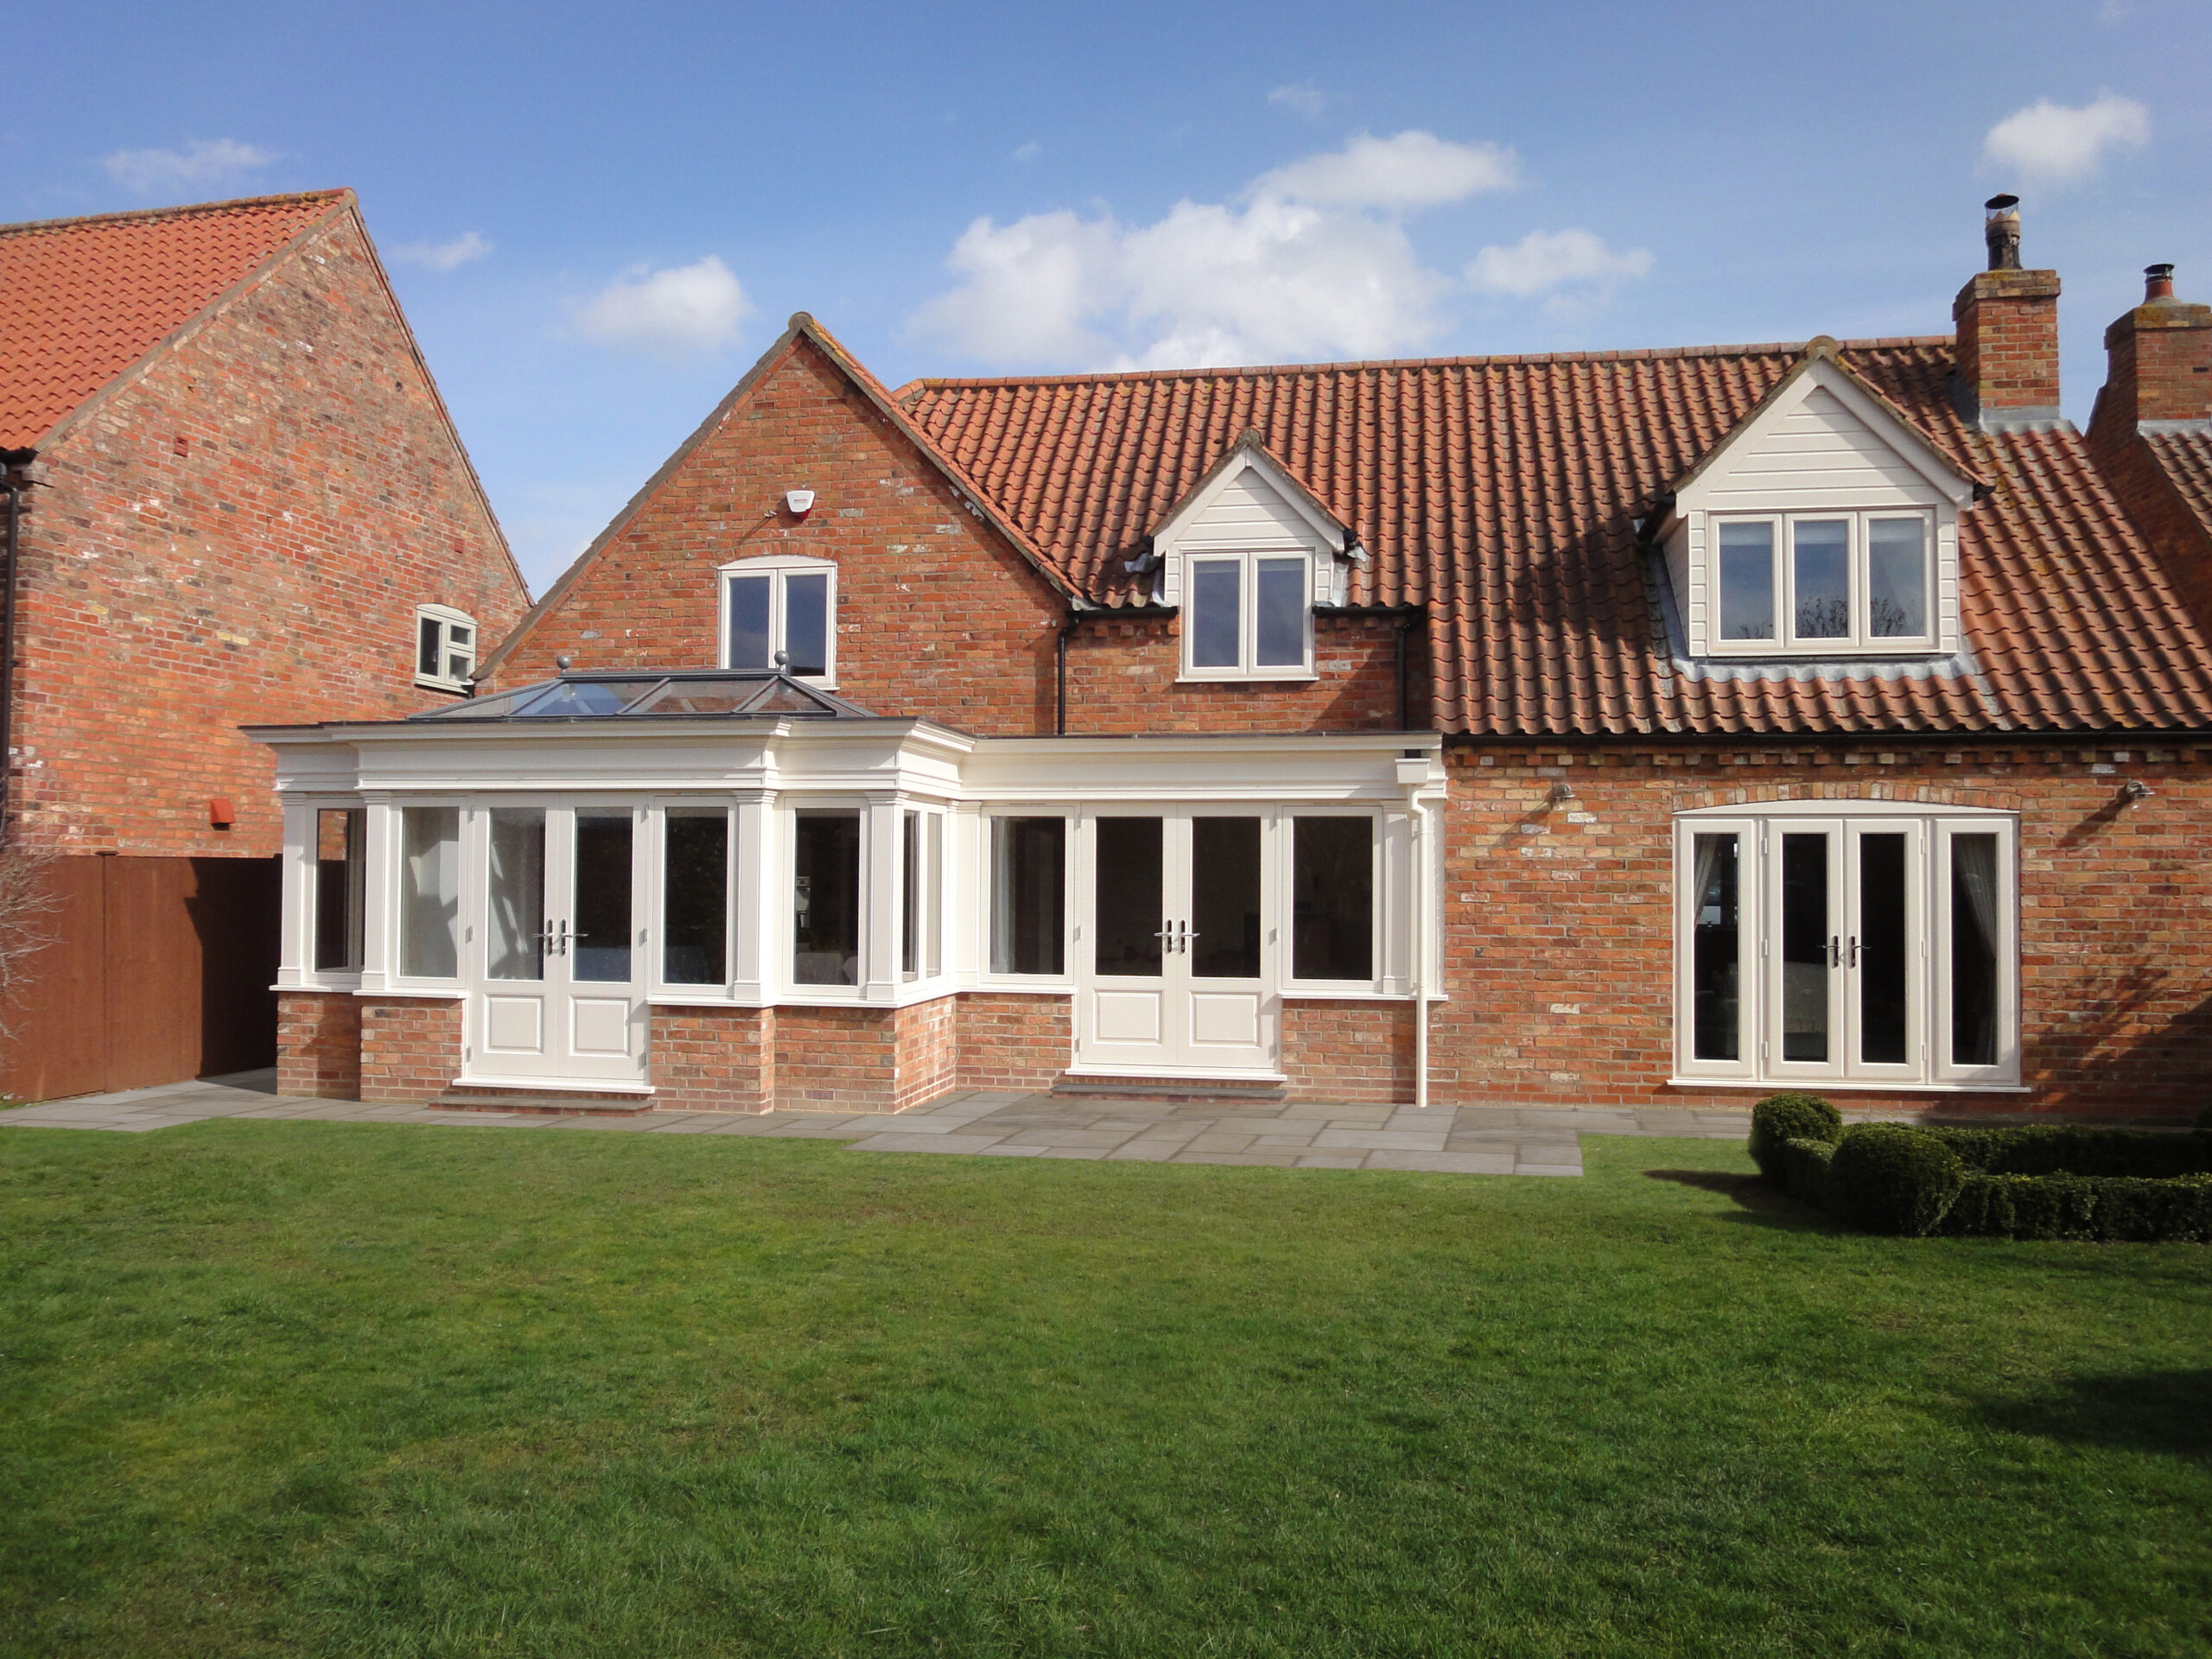 Orangery extension to the back of a large home